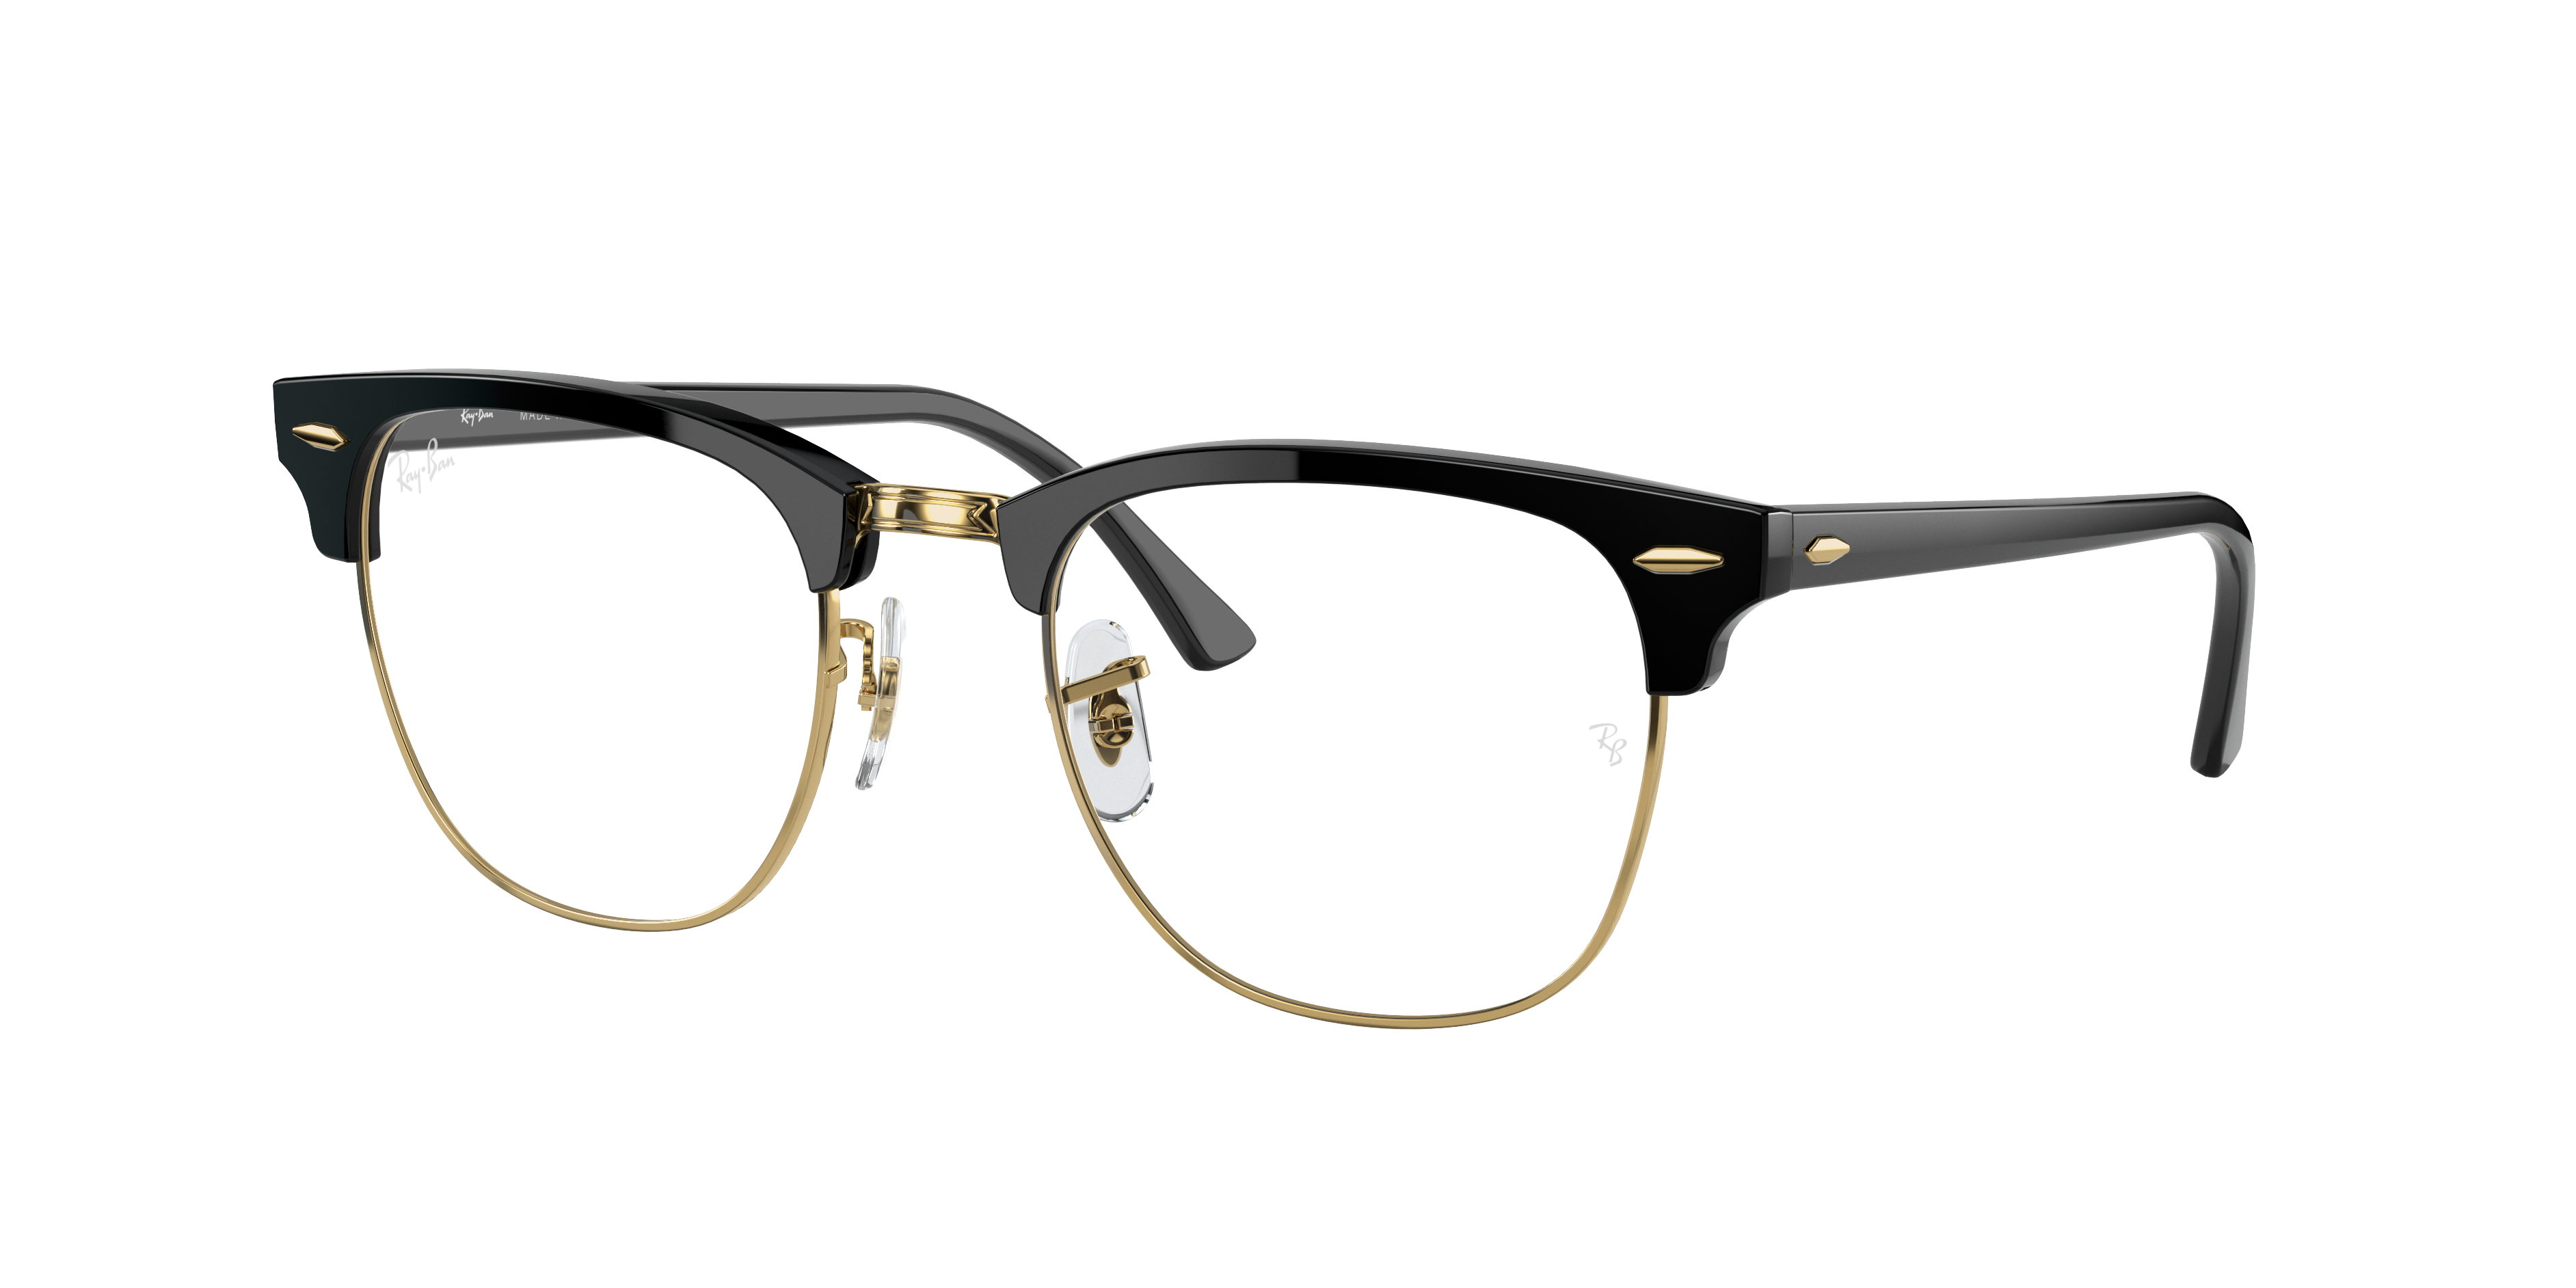 ray ban clubmasters